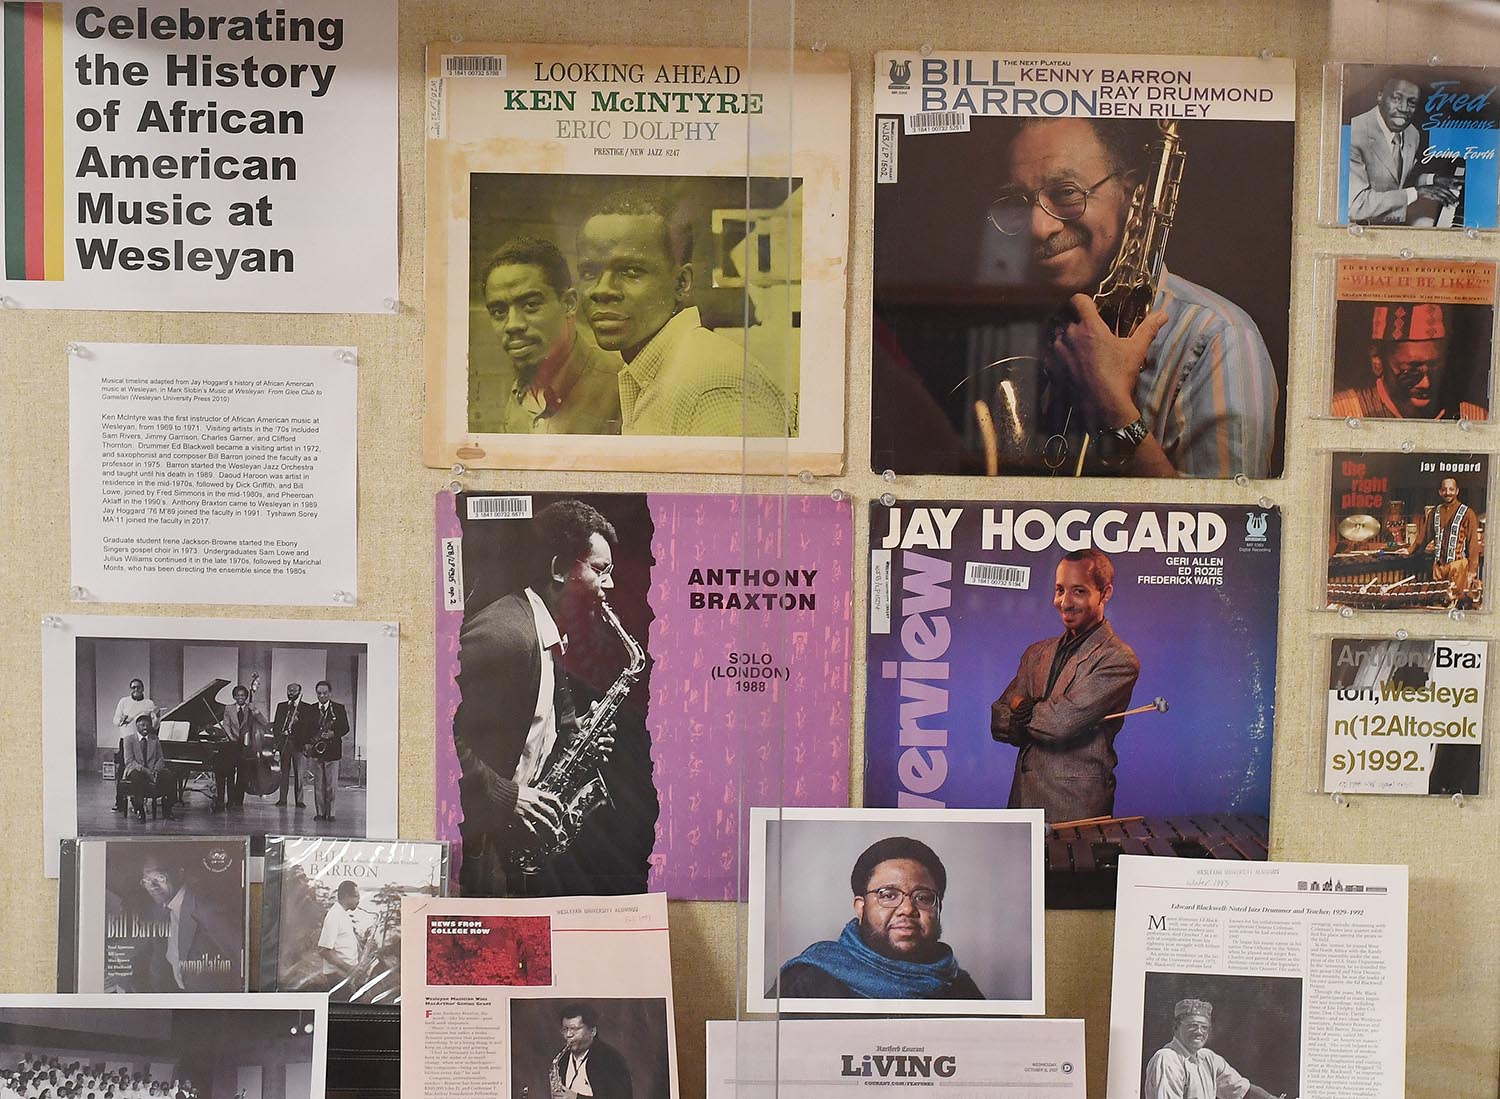 "Celebrating the History of African American Music at Wesleyan" is displayed outside the Music Library in Olin Library.